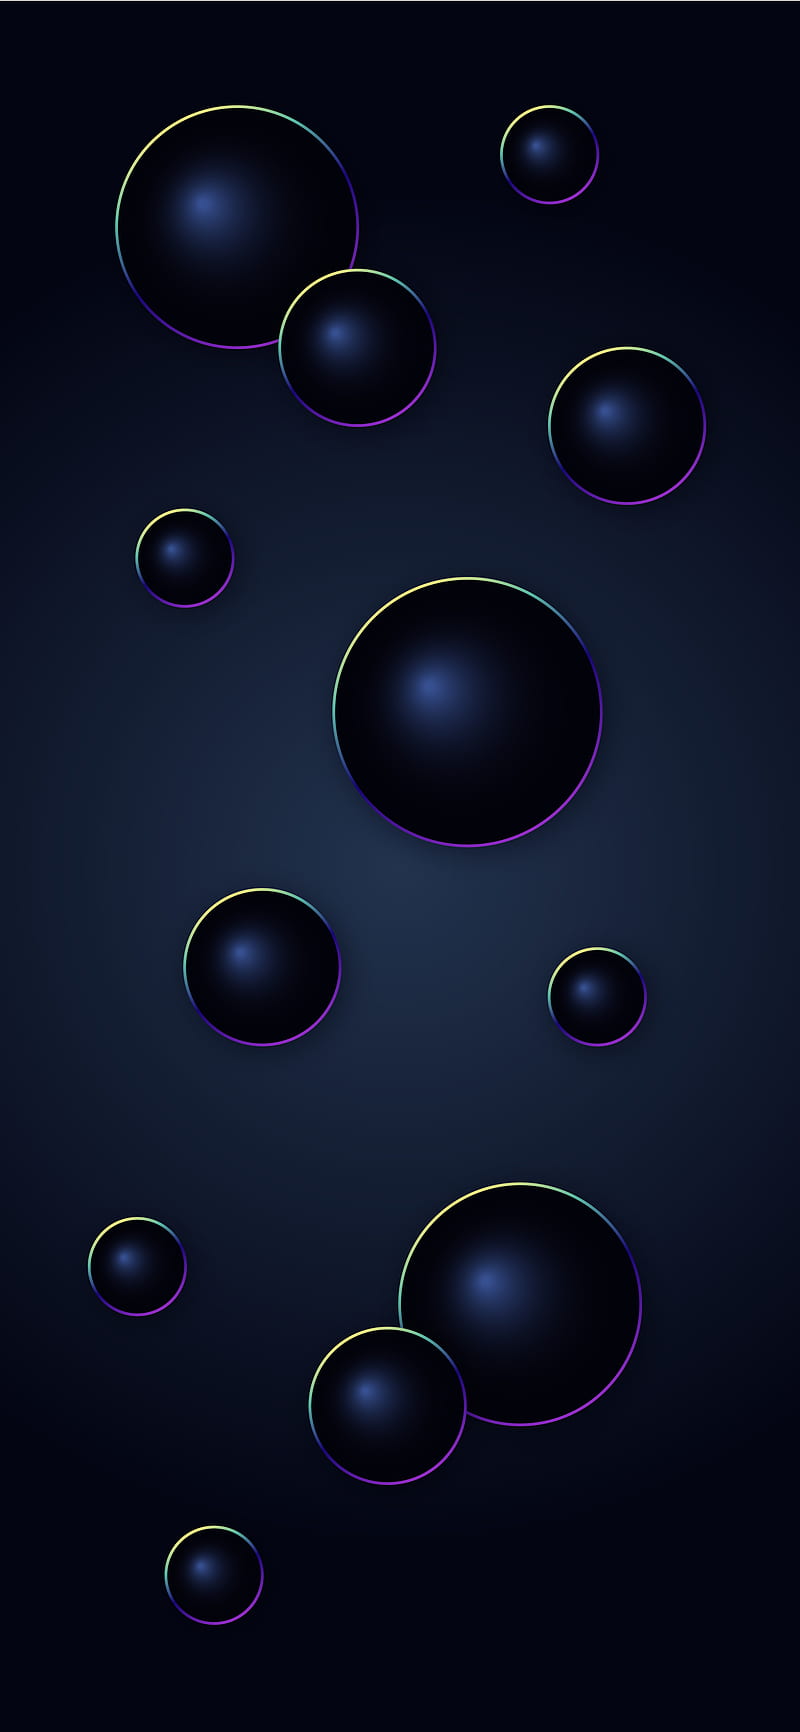 I managed to make this bugged iOS 16 dark wallpaper clean for use   riOSBeta